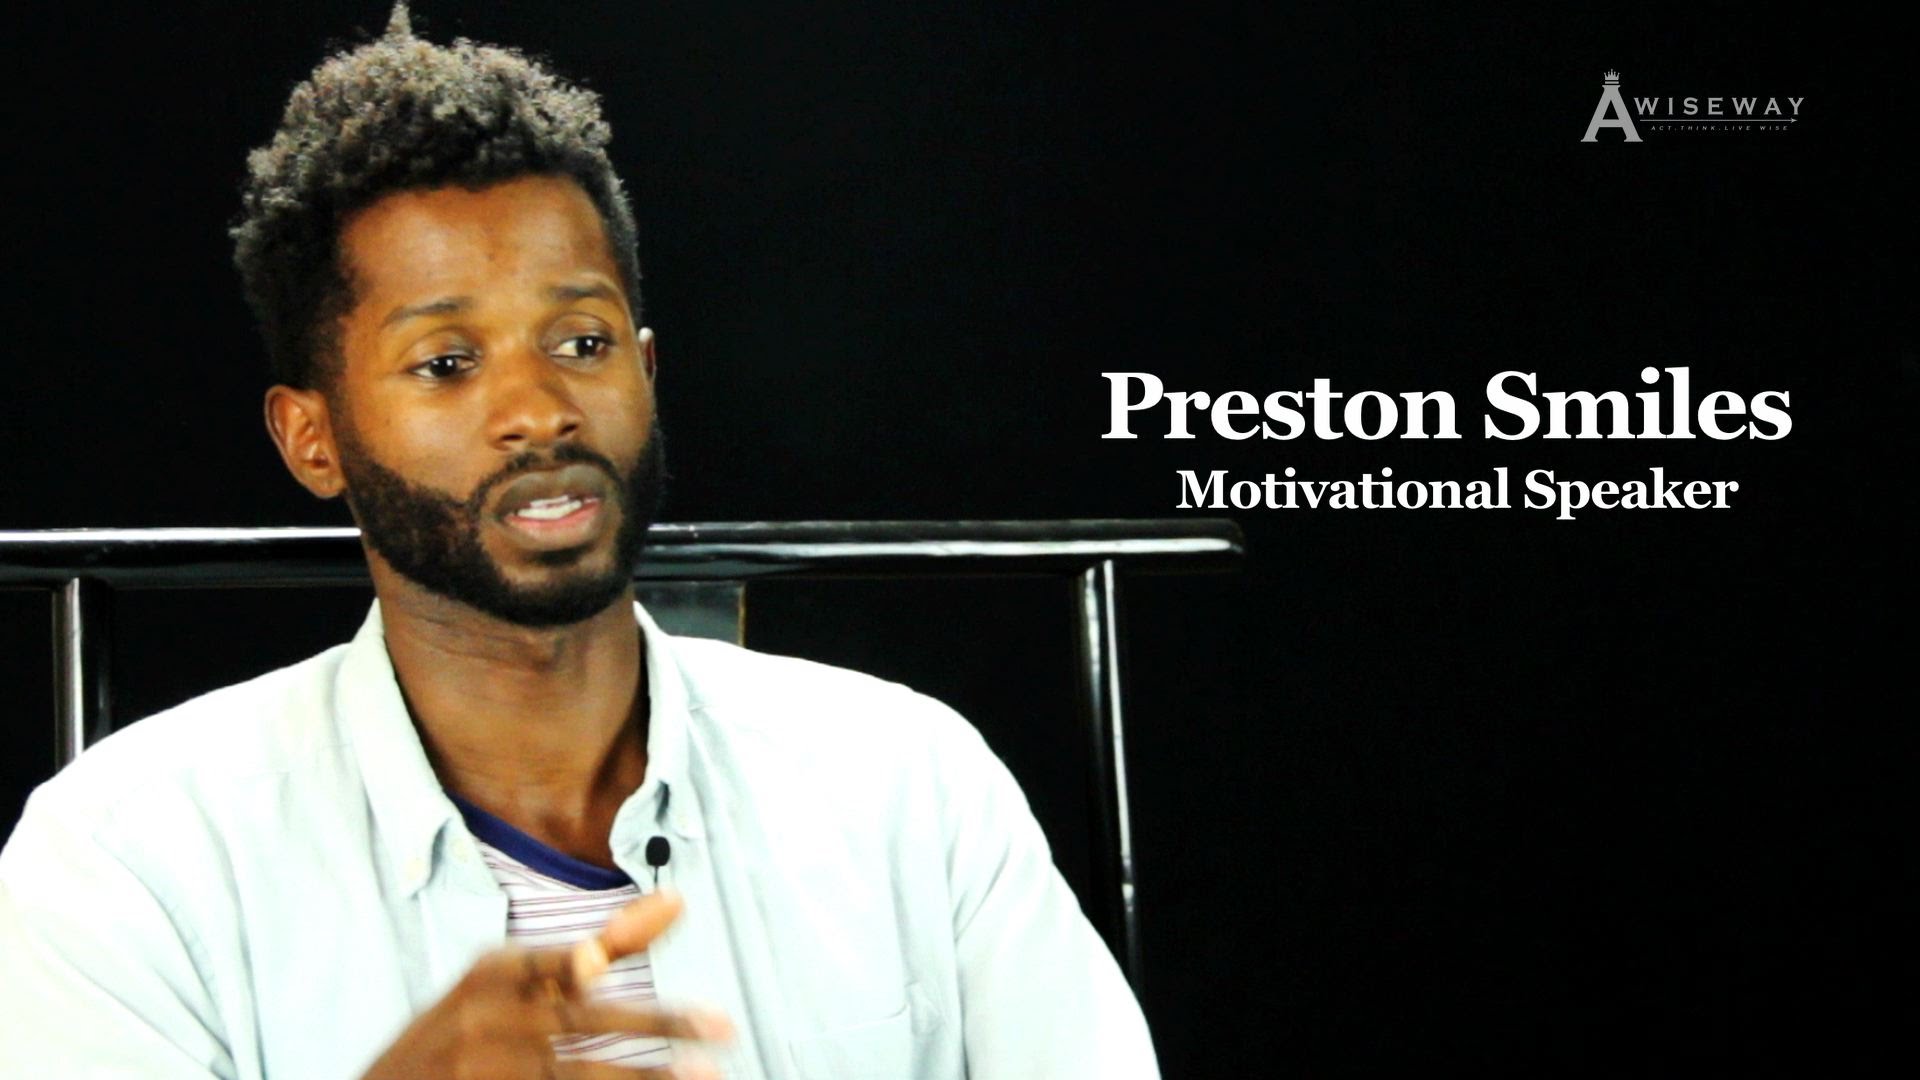 Preston Smiles Explains How Detrimental Over-Analysing Can Be for Growth